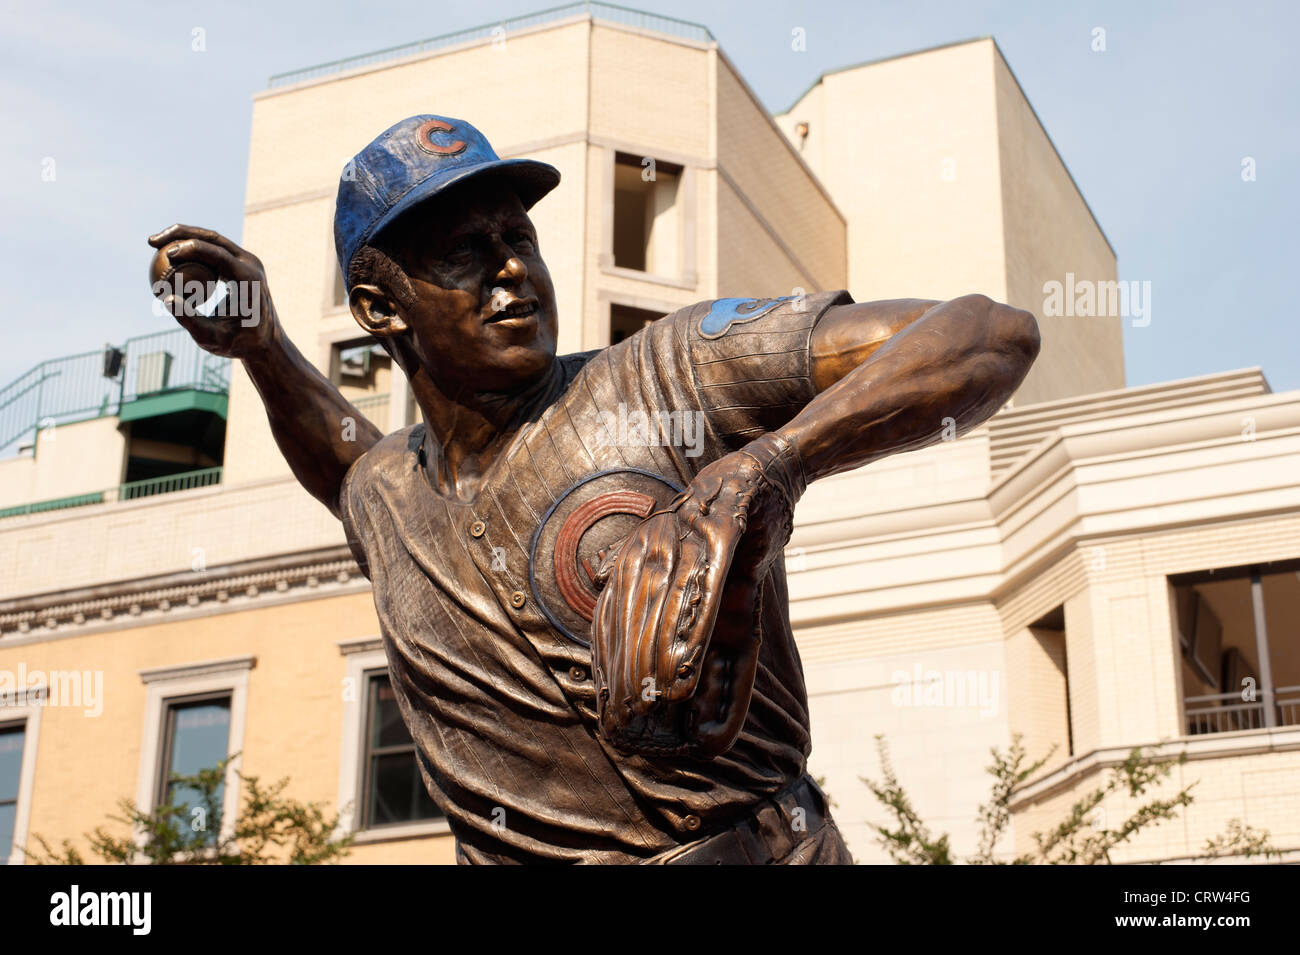 Statue of Ron Santo at Wrigley Field, Chicago. DETAILS IN